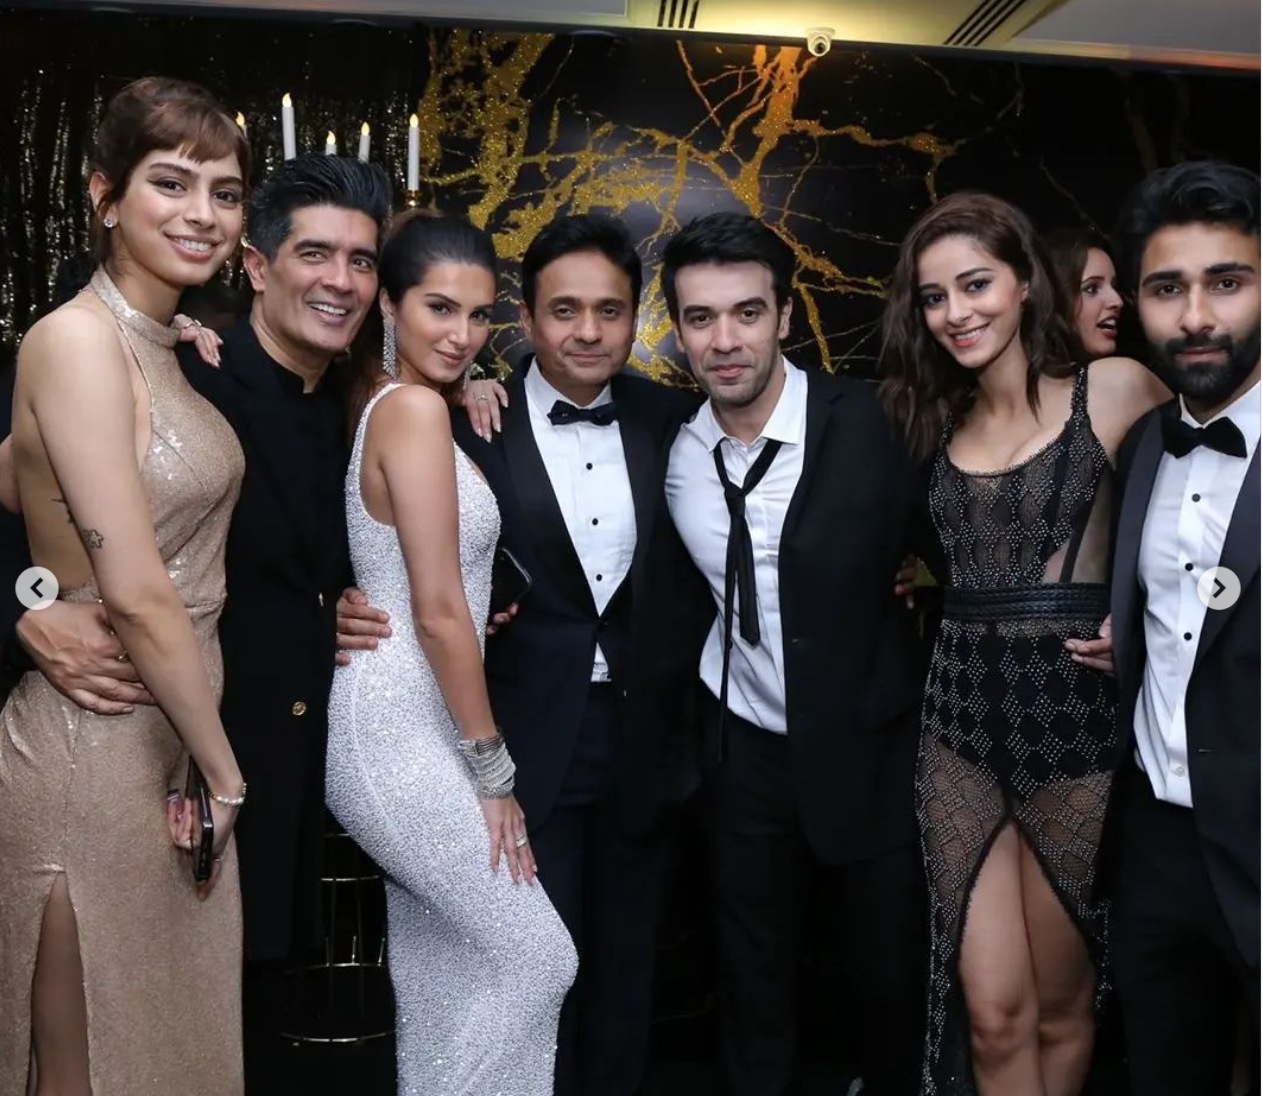 Khushi Kapoor with other guests at Apoorva Mehta's bash.